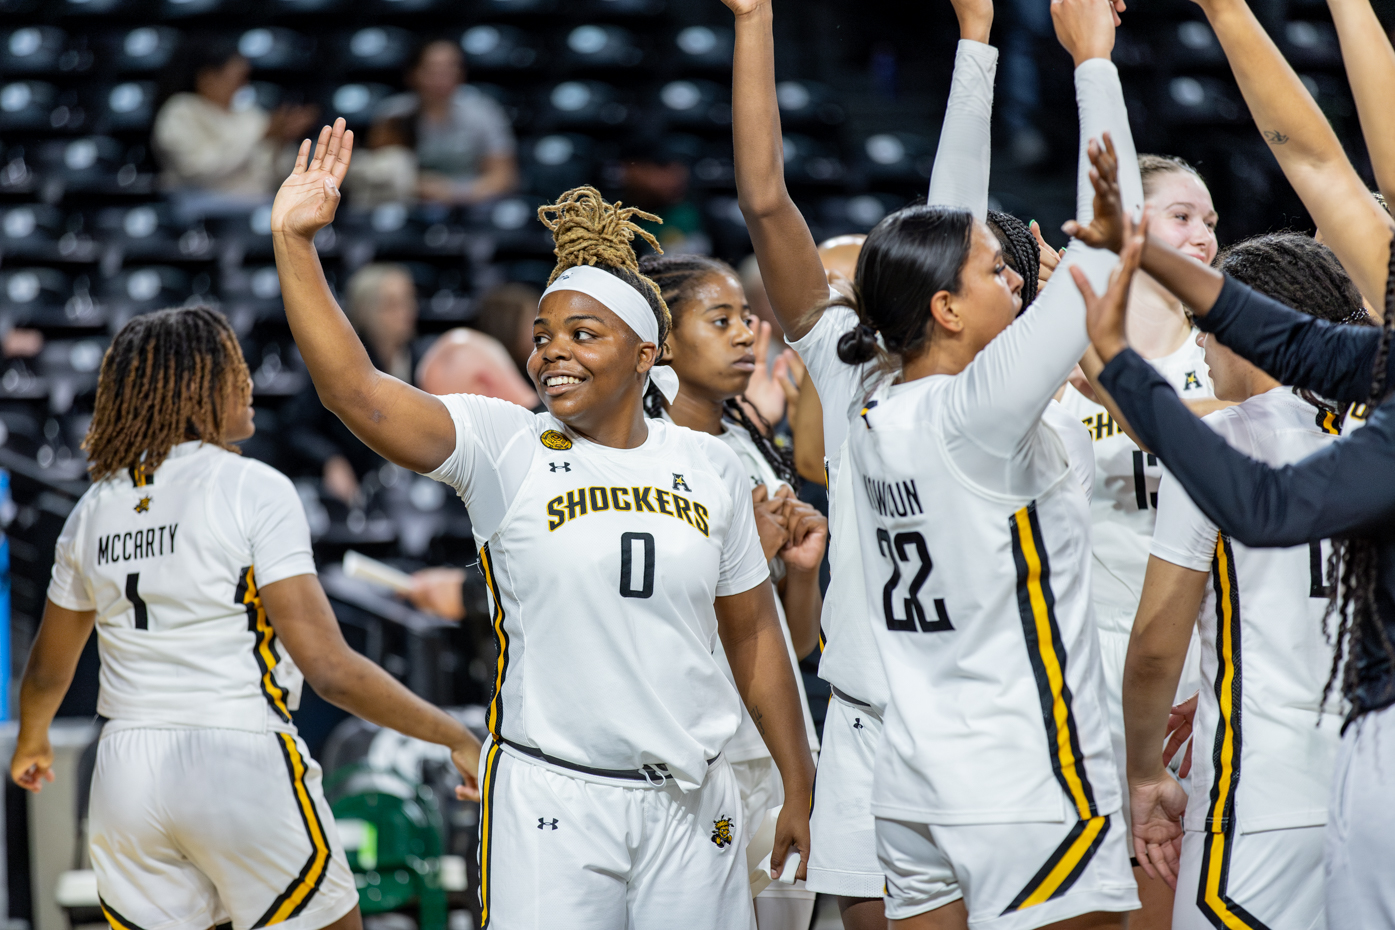 Following the Shocker win against the MSSU Lions, Aniya Bell waves to the audience. Wichita won their Nov. 1 exhibition match, 75-65.